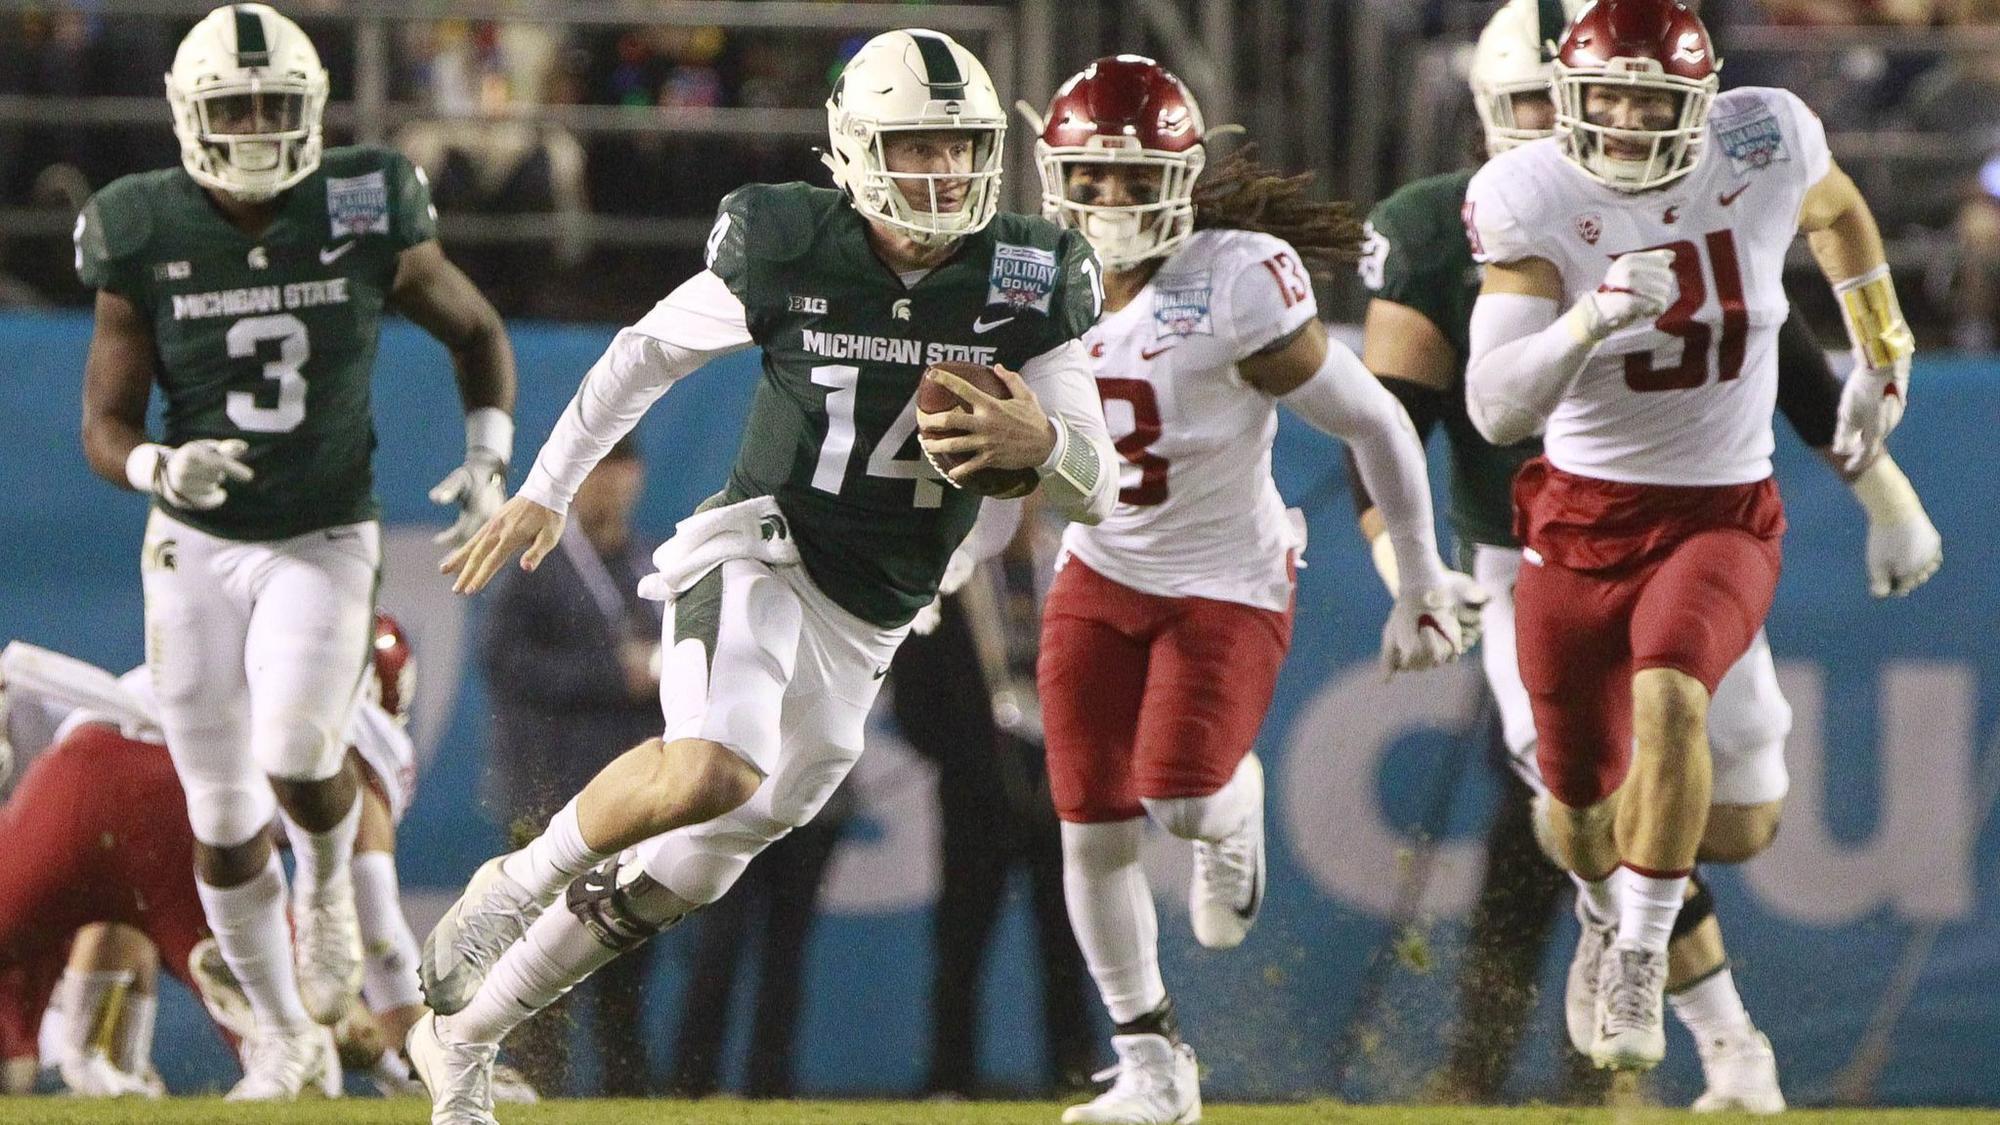 Holiday Bowl hopes to maintain tieins with Big Ten, Pac12 conferences